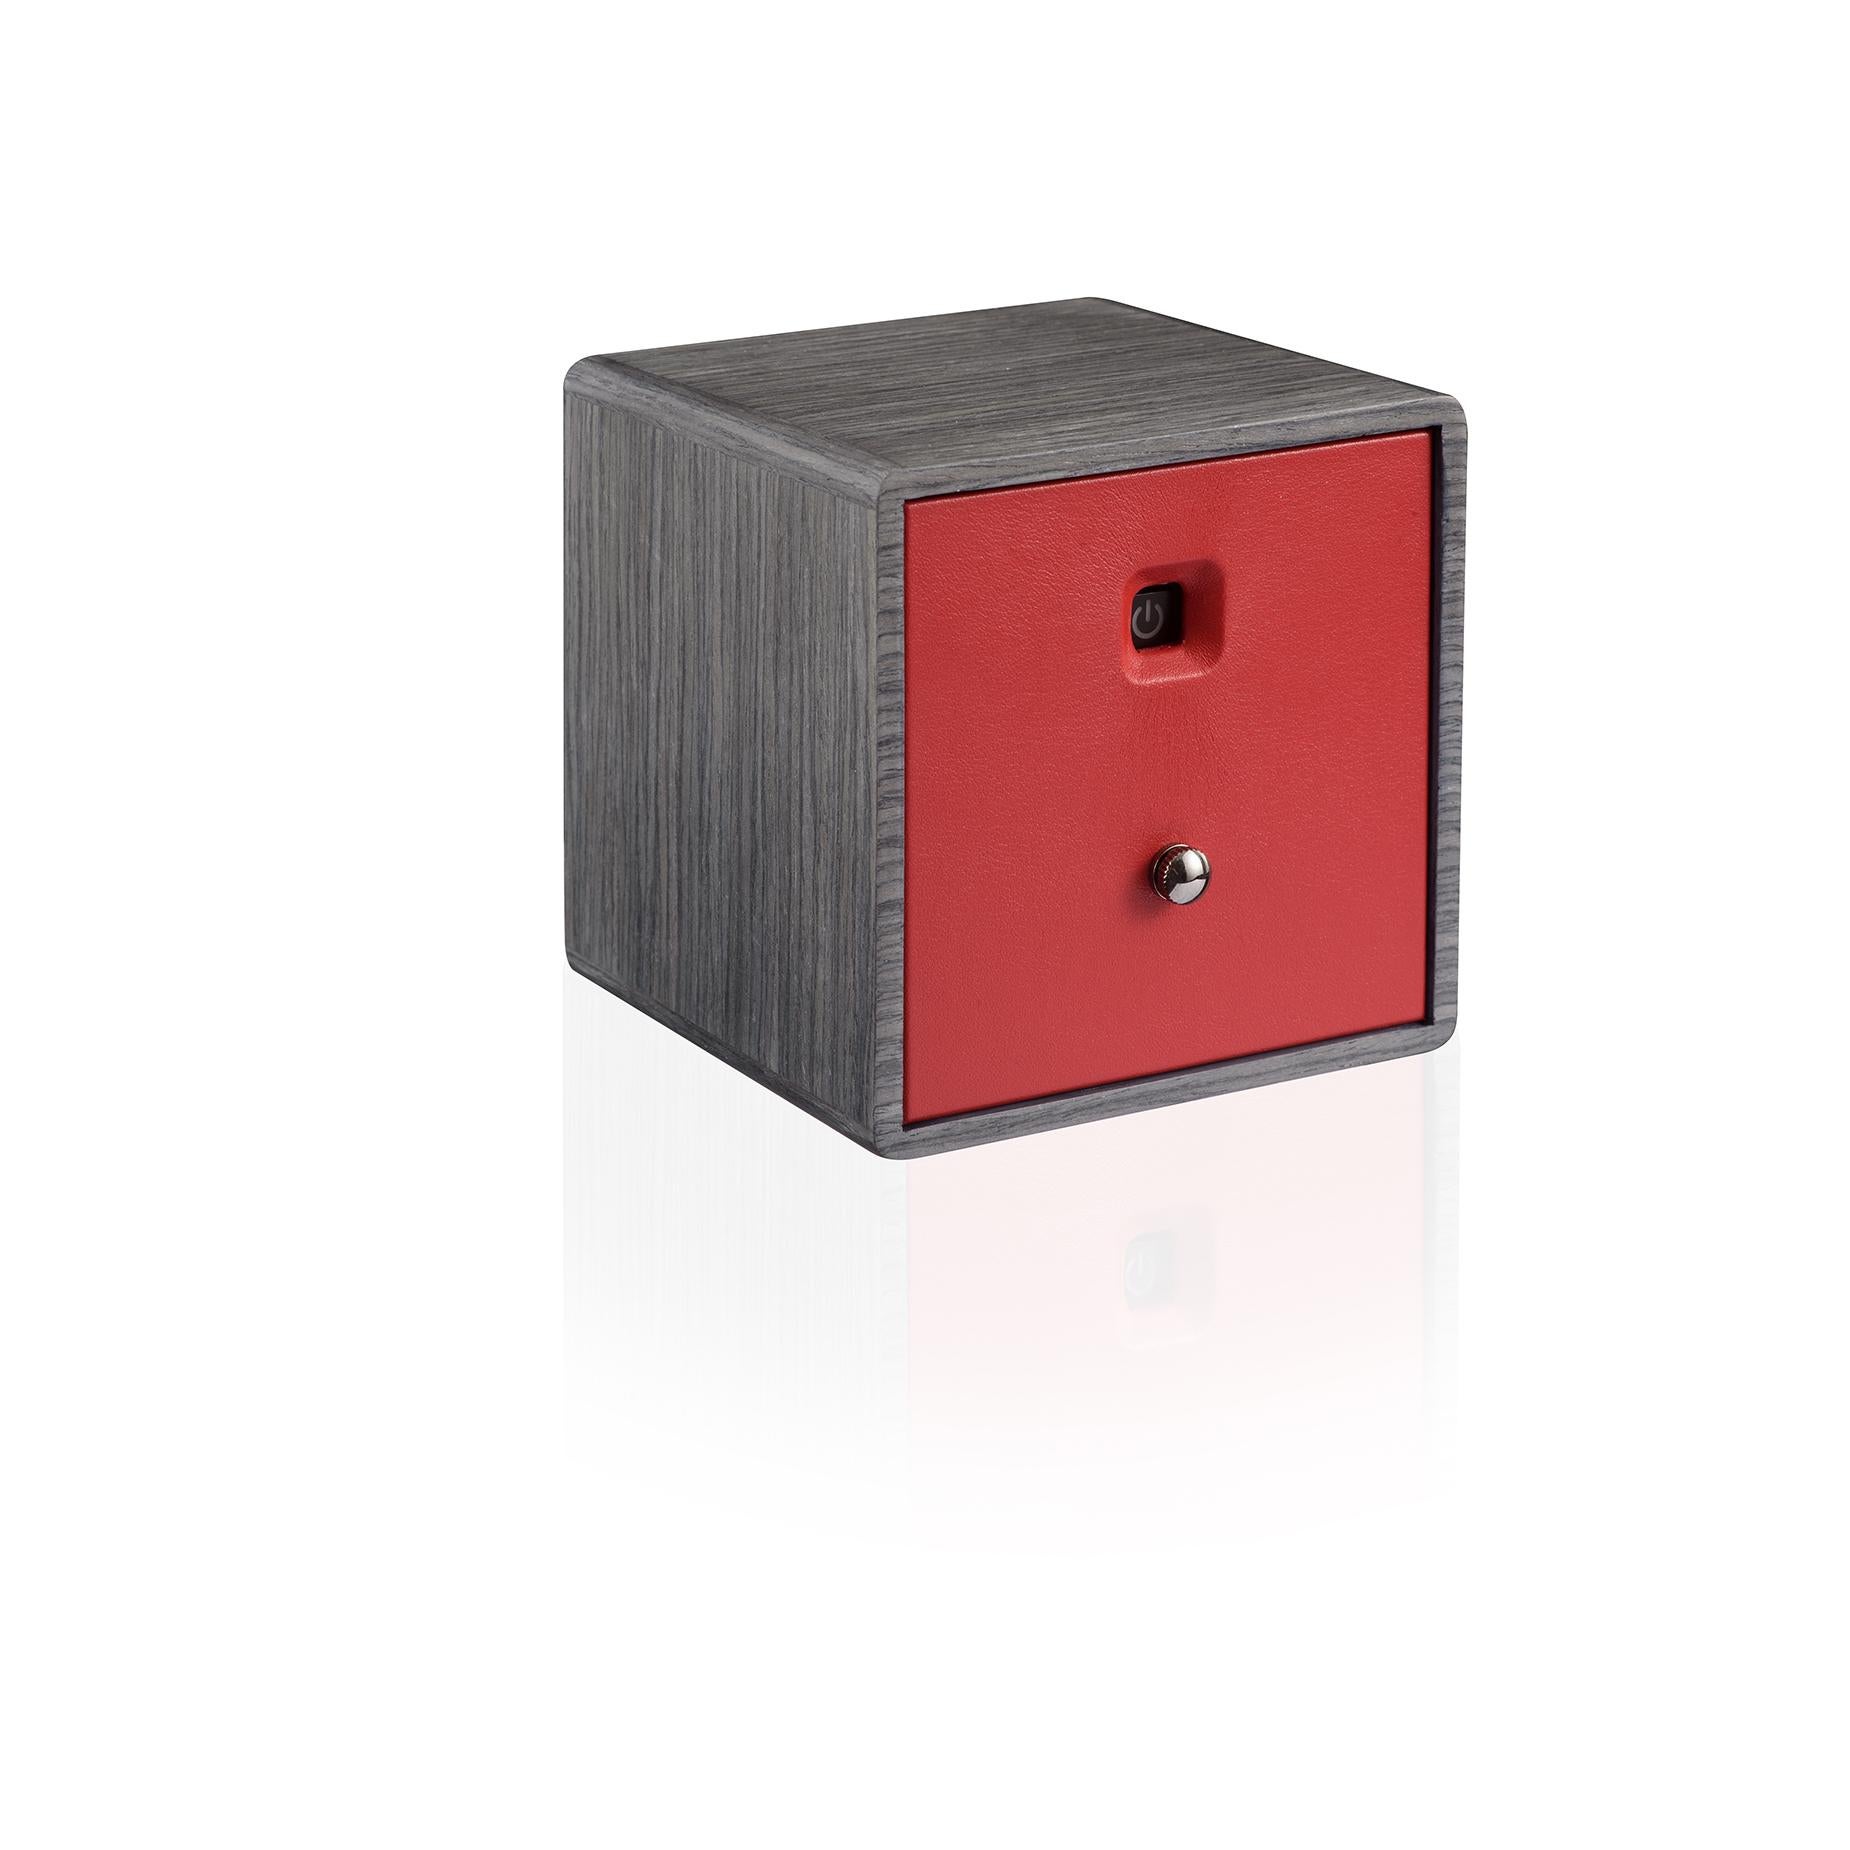 Temp Unico Rosso Watch Winder in Oak Smoke Grey by Agresti In New Condition For Sale In New York, NY